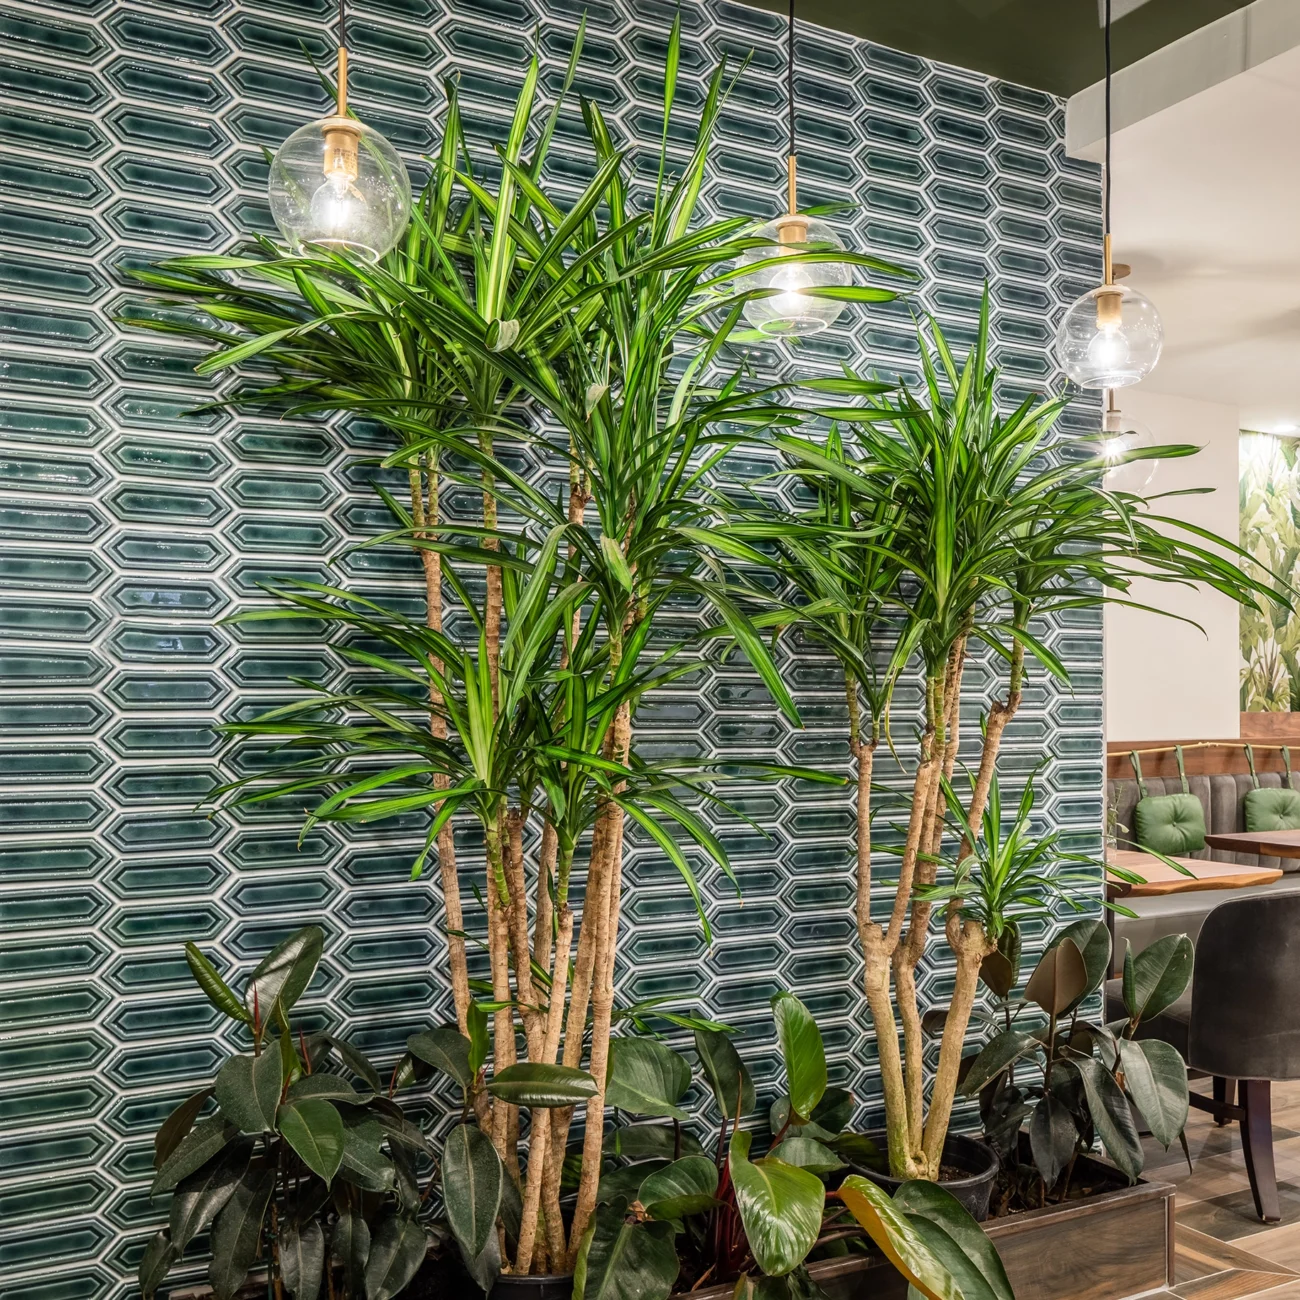 Christine Vroom Interiors Pacific Standard | Contemporary Restaurant Planter with tall plants against a green geometric tiled wall